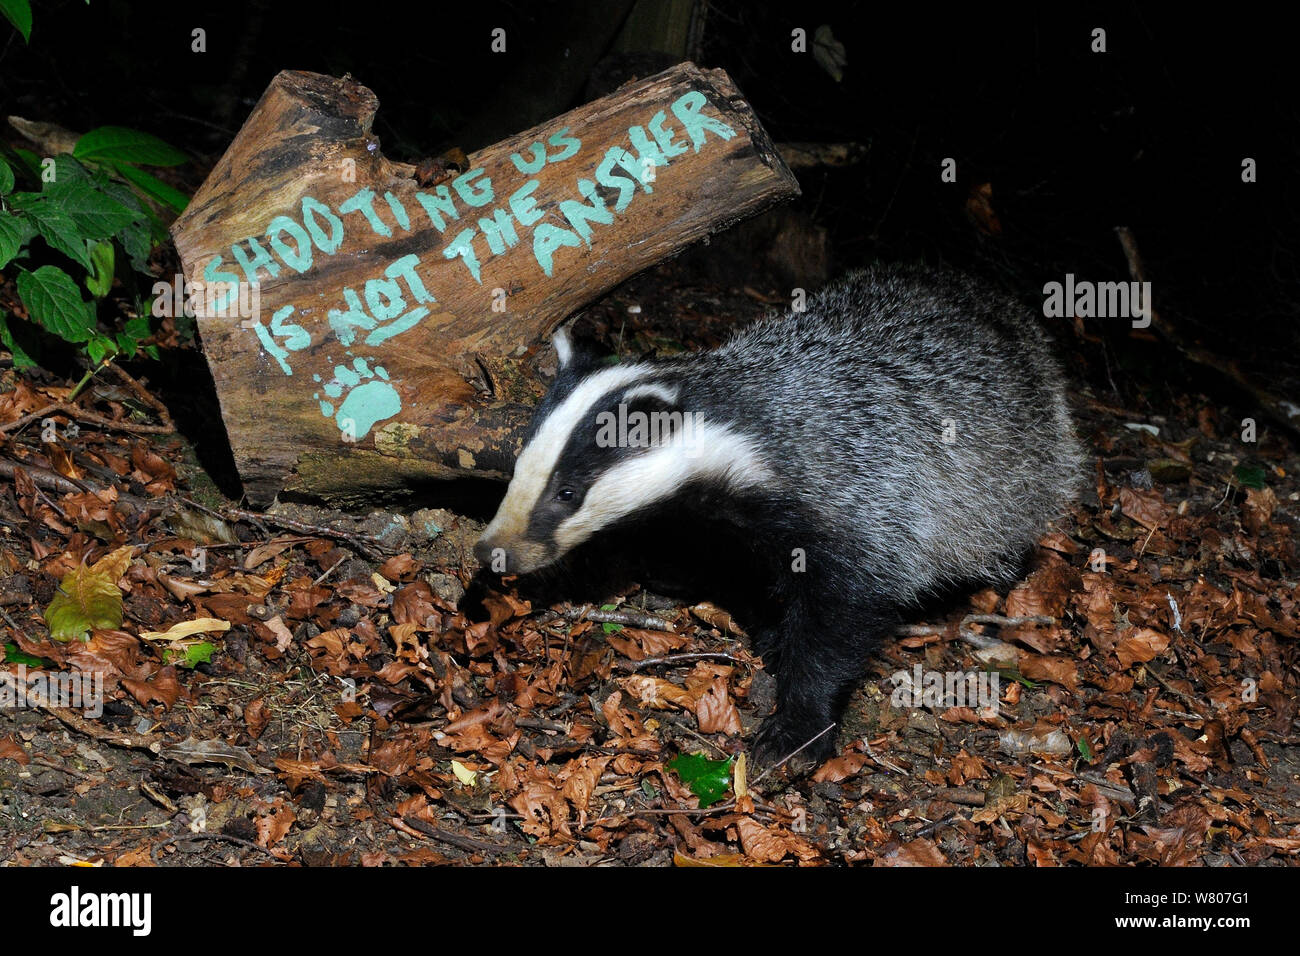 European badger (Meles meles) and message 'Shooting us is not the answer' painted on tree log, protesting against badger culling, Wiltshire, UK, September 2015.  Taken by a remote camera trap. Stock Photo